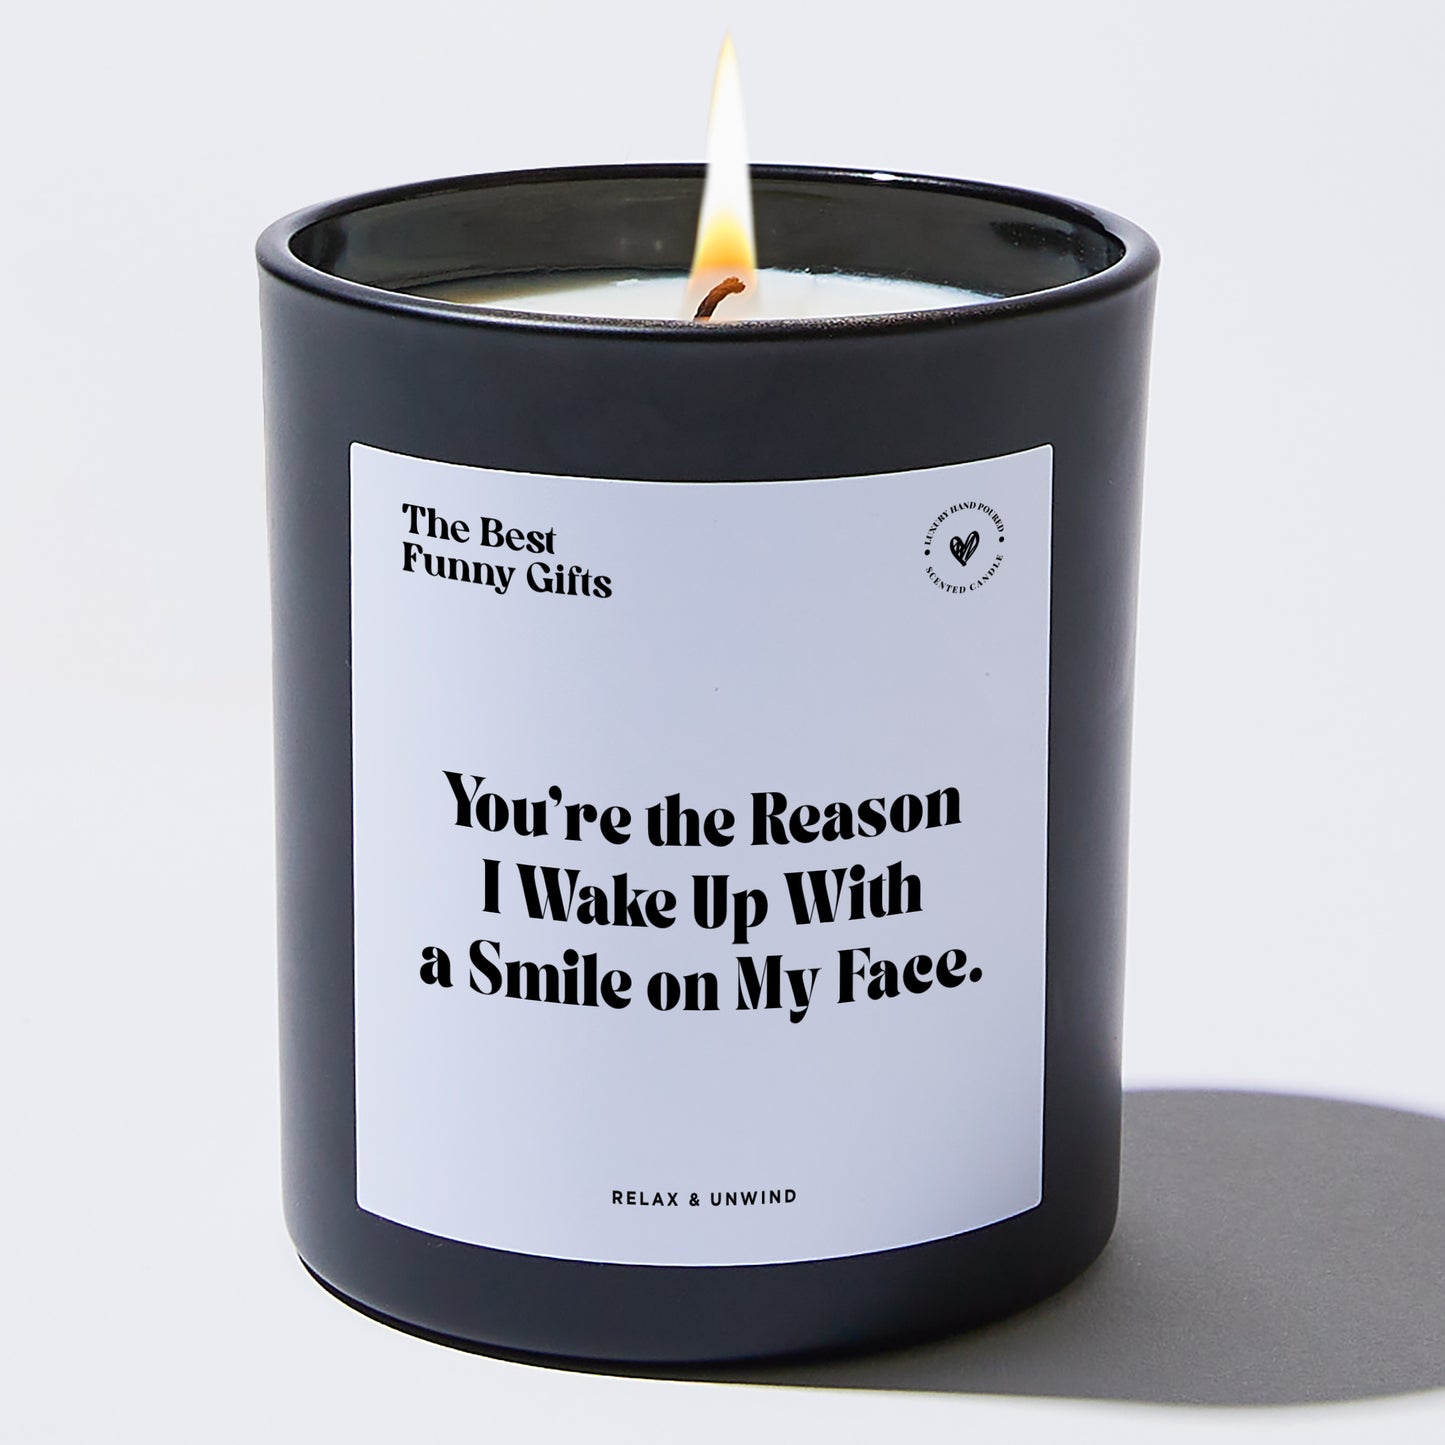 Anniversary You're the Reason I Wake Up With a Smile on My Face. - The Best Funny Gifts